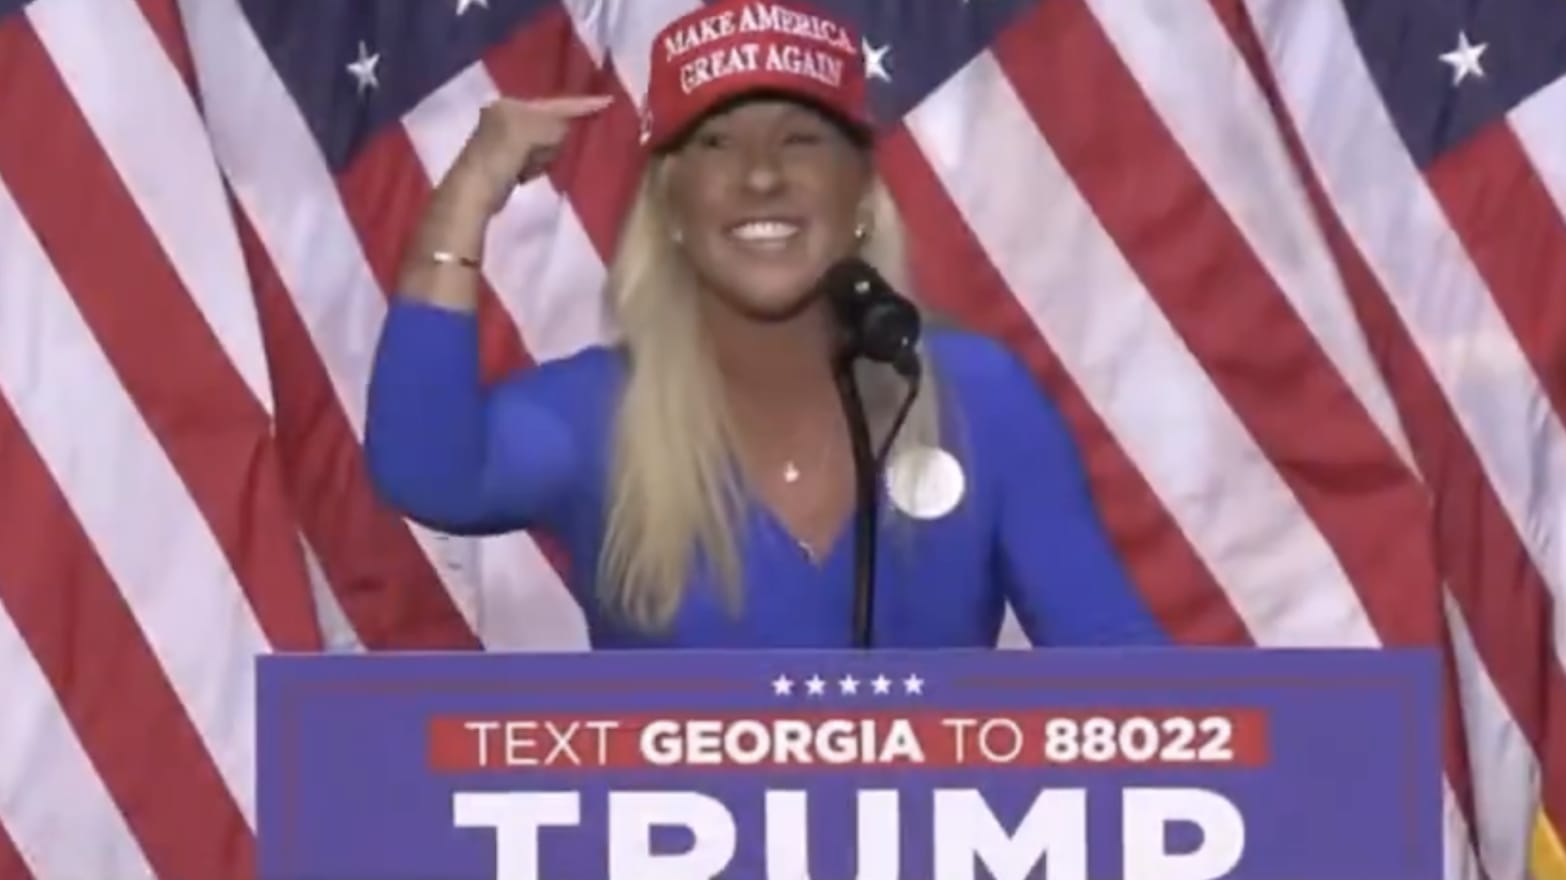 Marjorie Taylor Greene speaks at a Donald Trump rally in Georgia. 